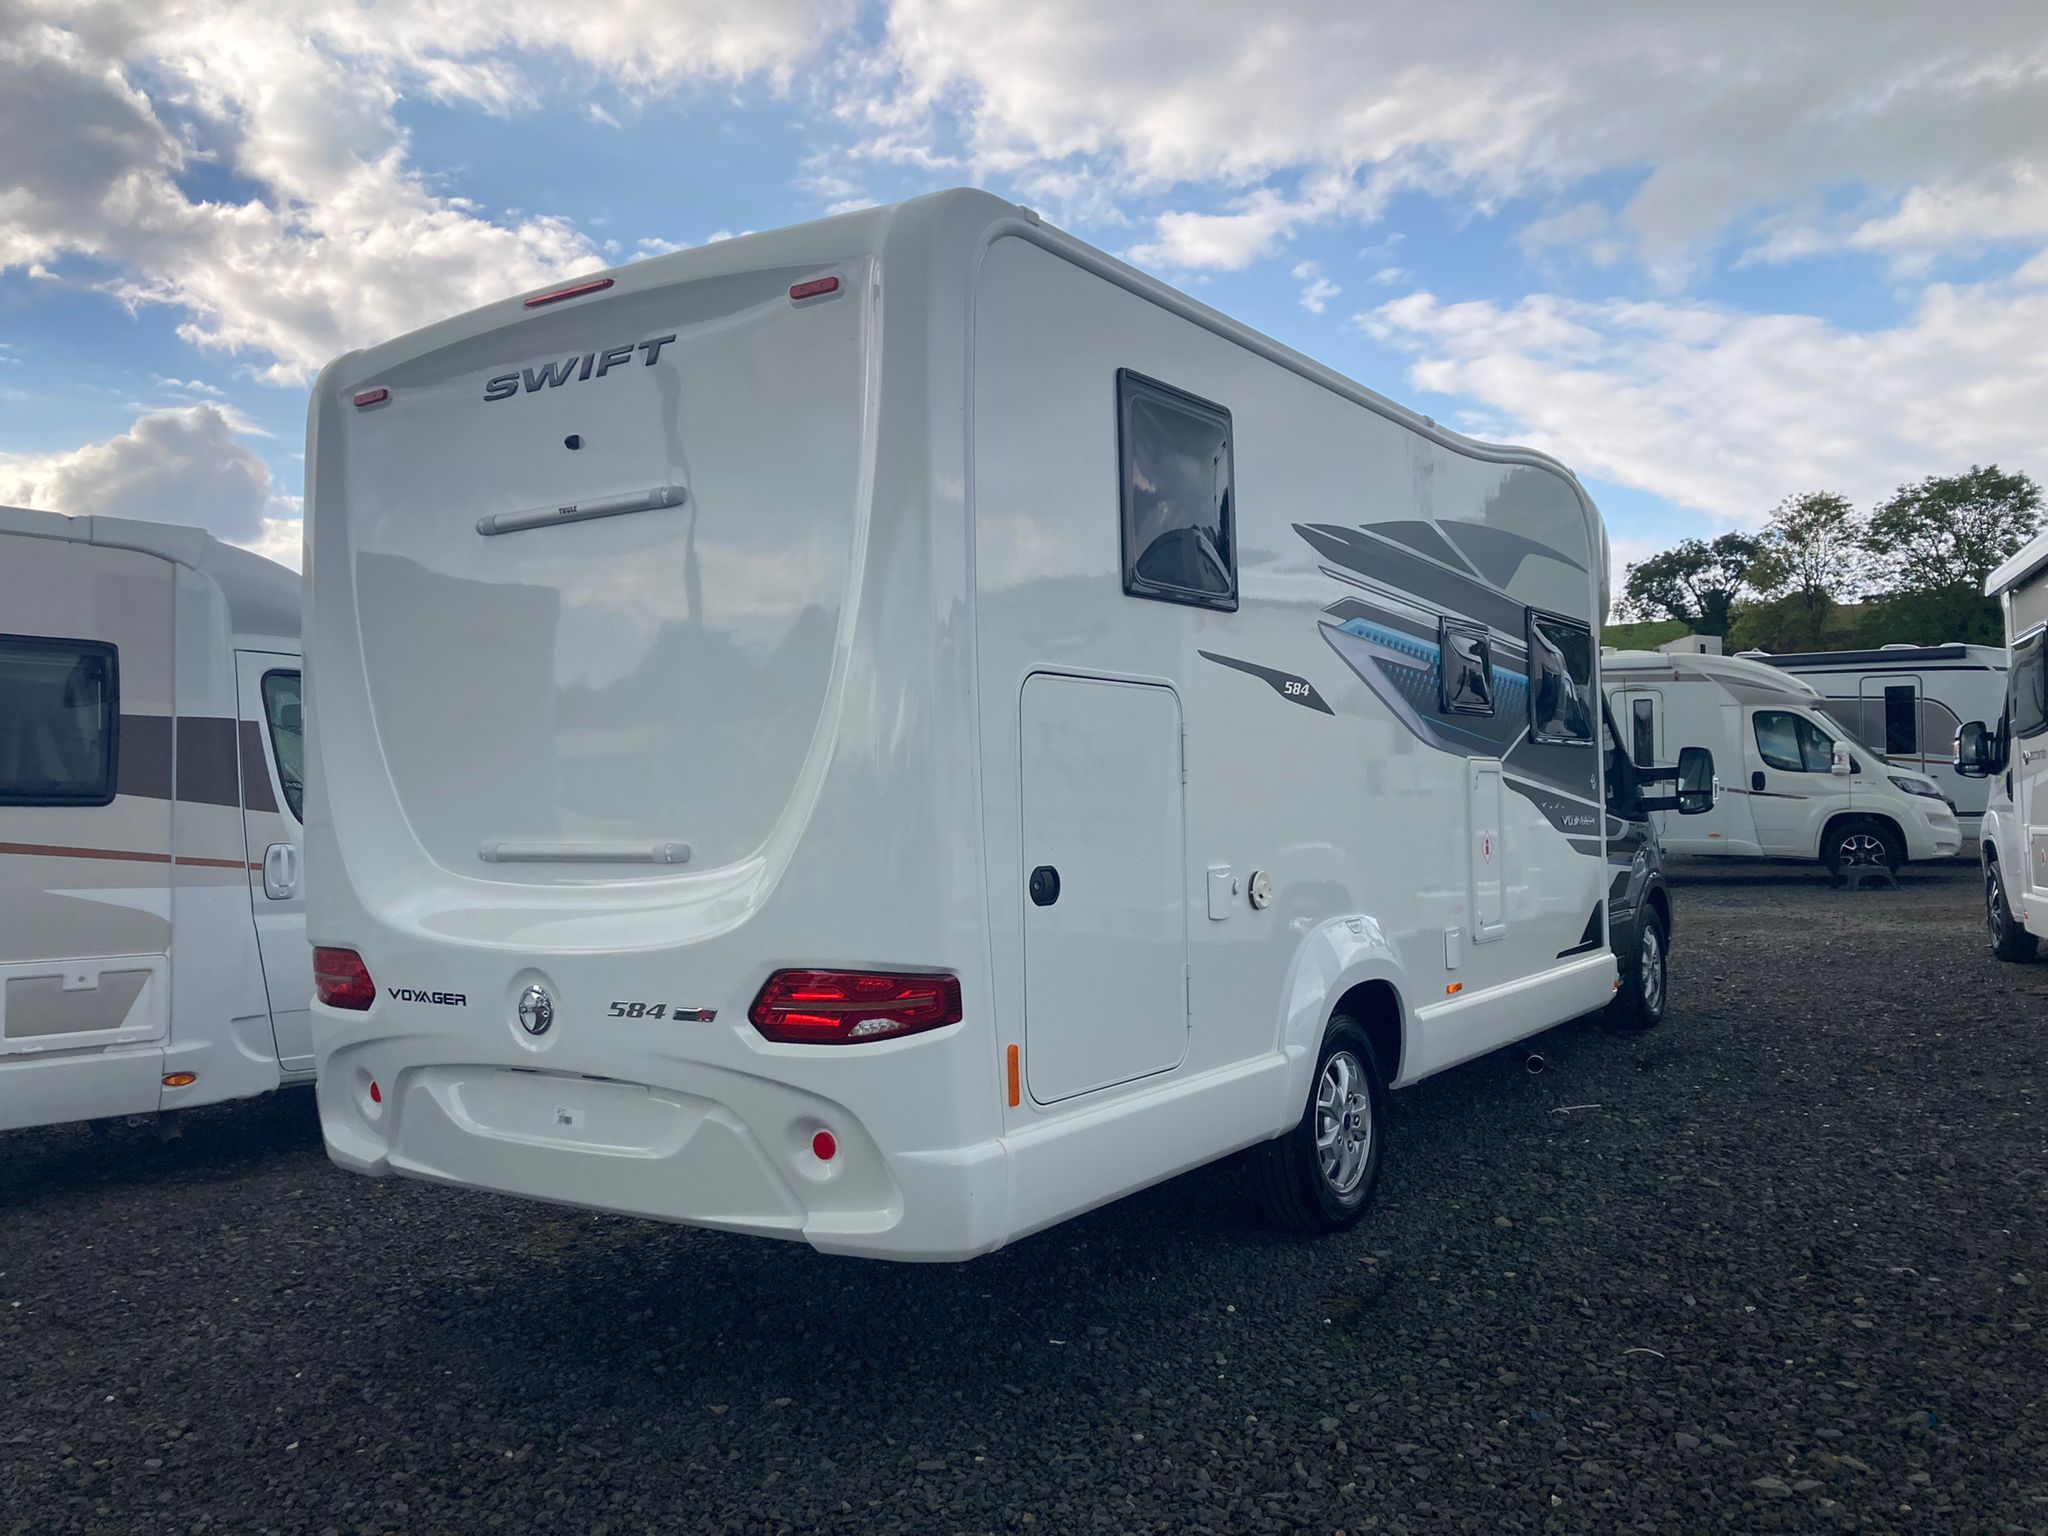 New Swift Voyager 584 - Manual